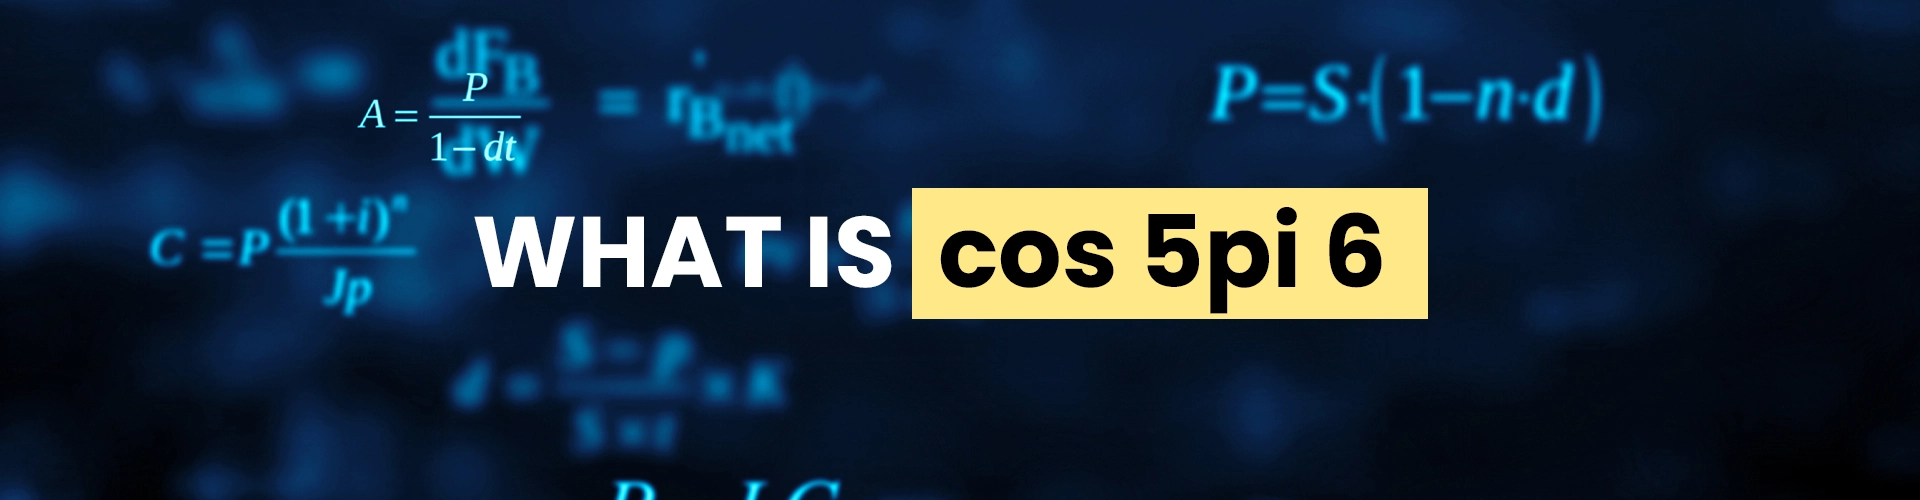 What is cos 5pi 6?